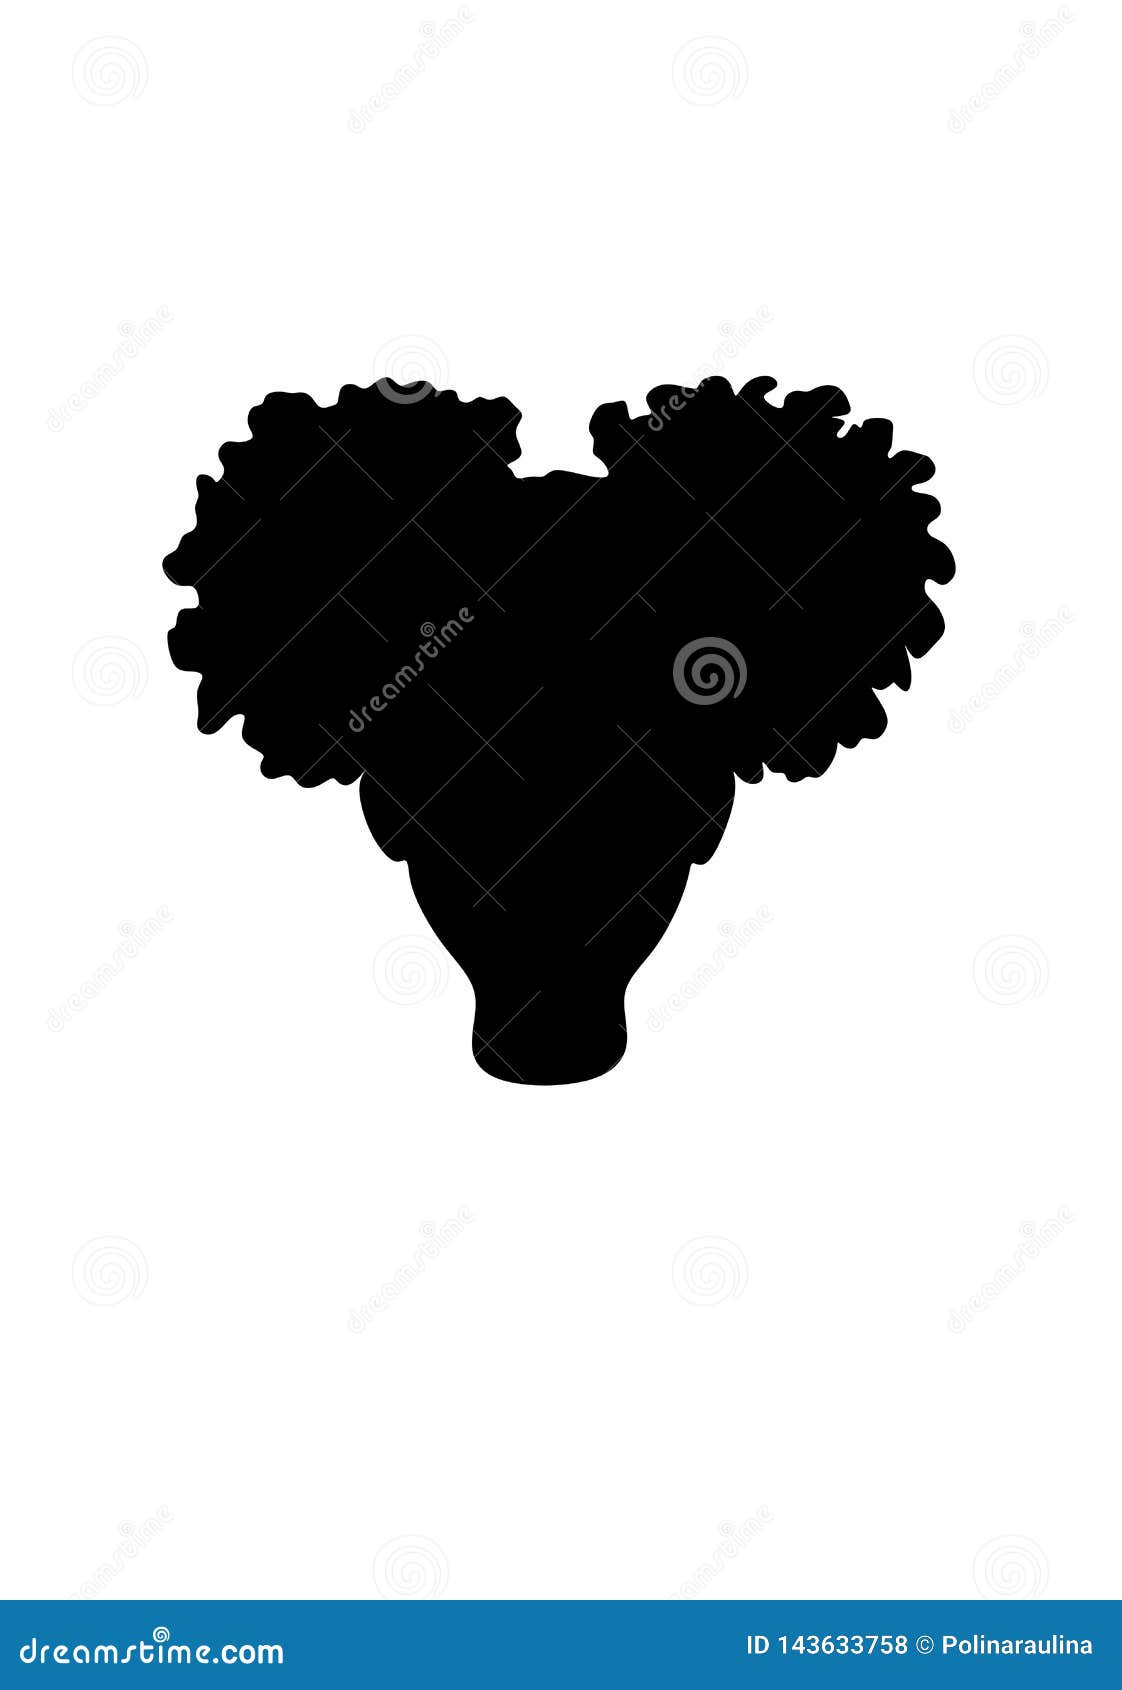 Download Little Black African American Girl Head With Curly Pony Tail Puffs Cricut Vector Silhouette Illustration Stock Photo Illustration Of Brunette Curly 143633758